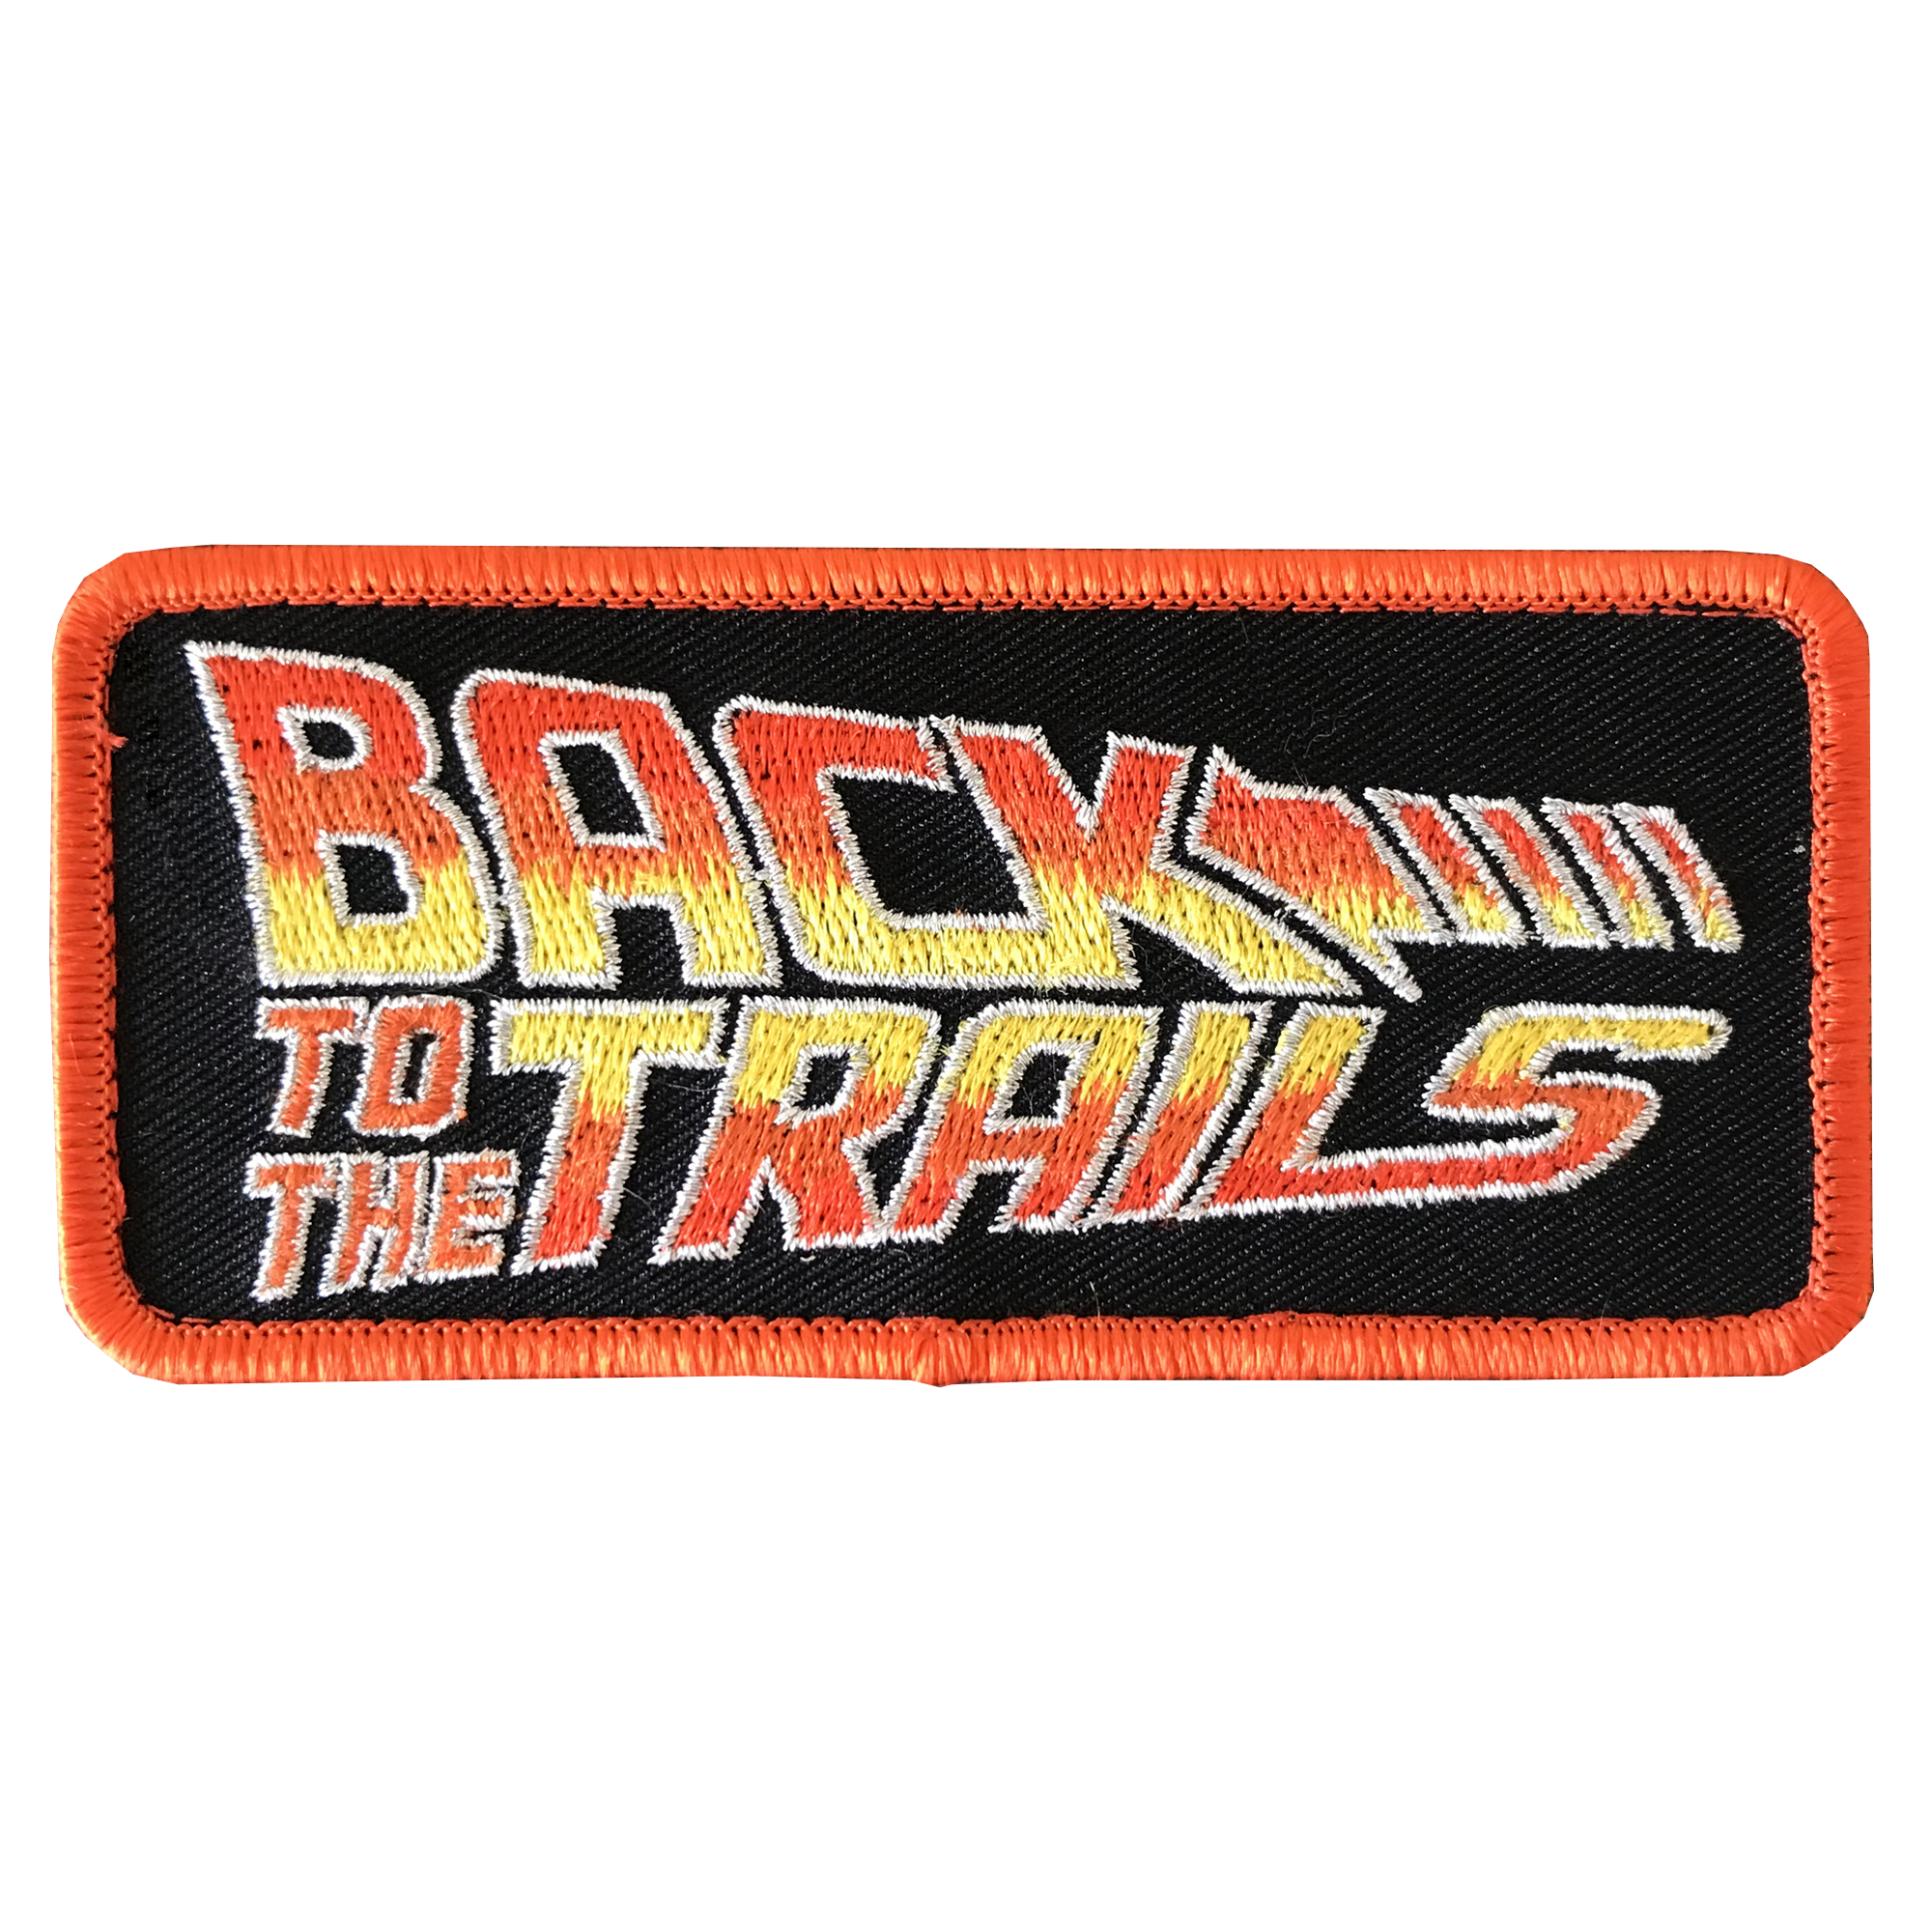 Back to the Trails Patch - GZila Designs